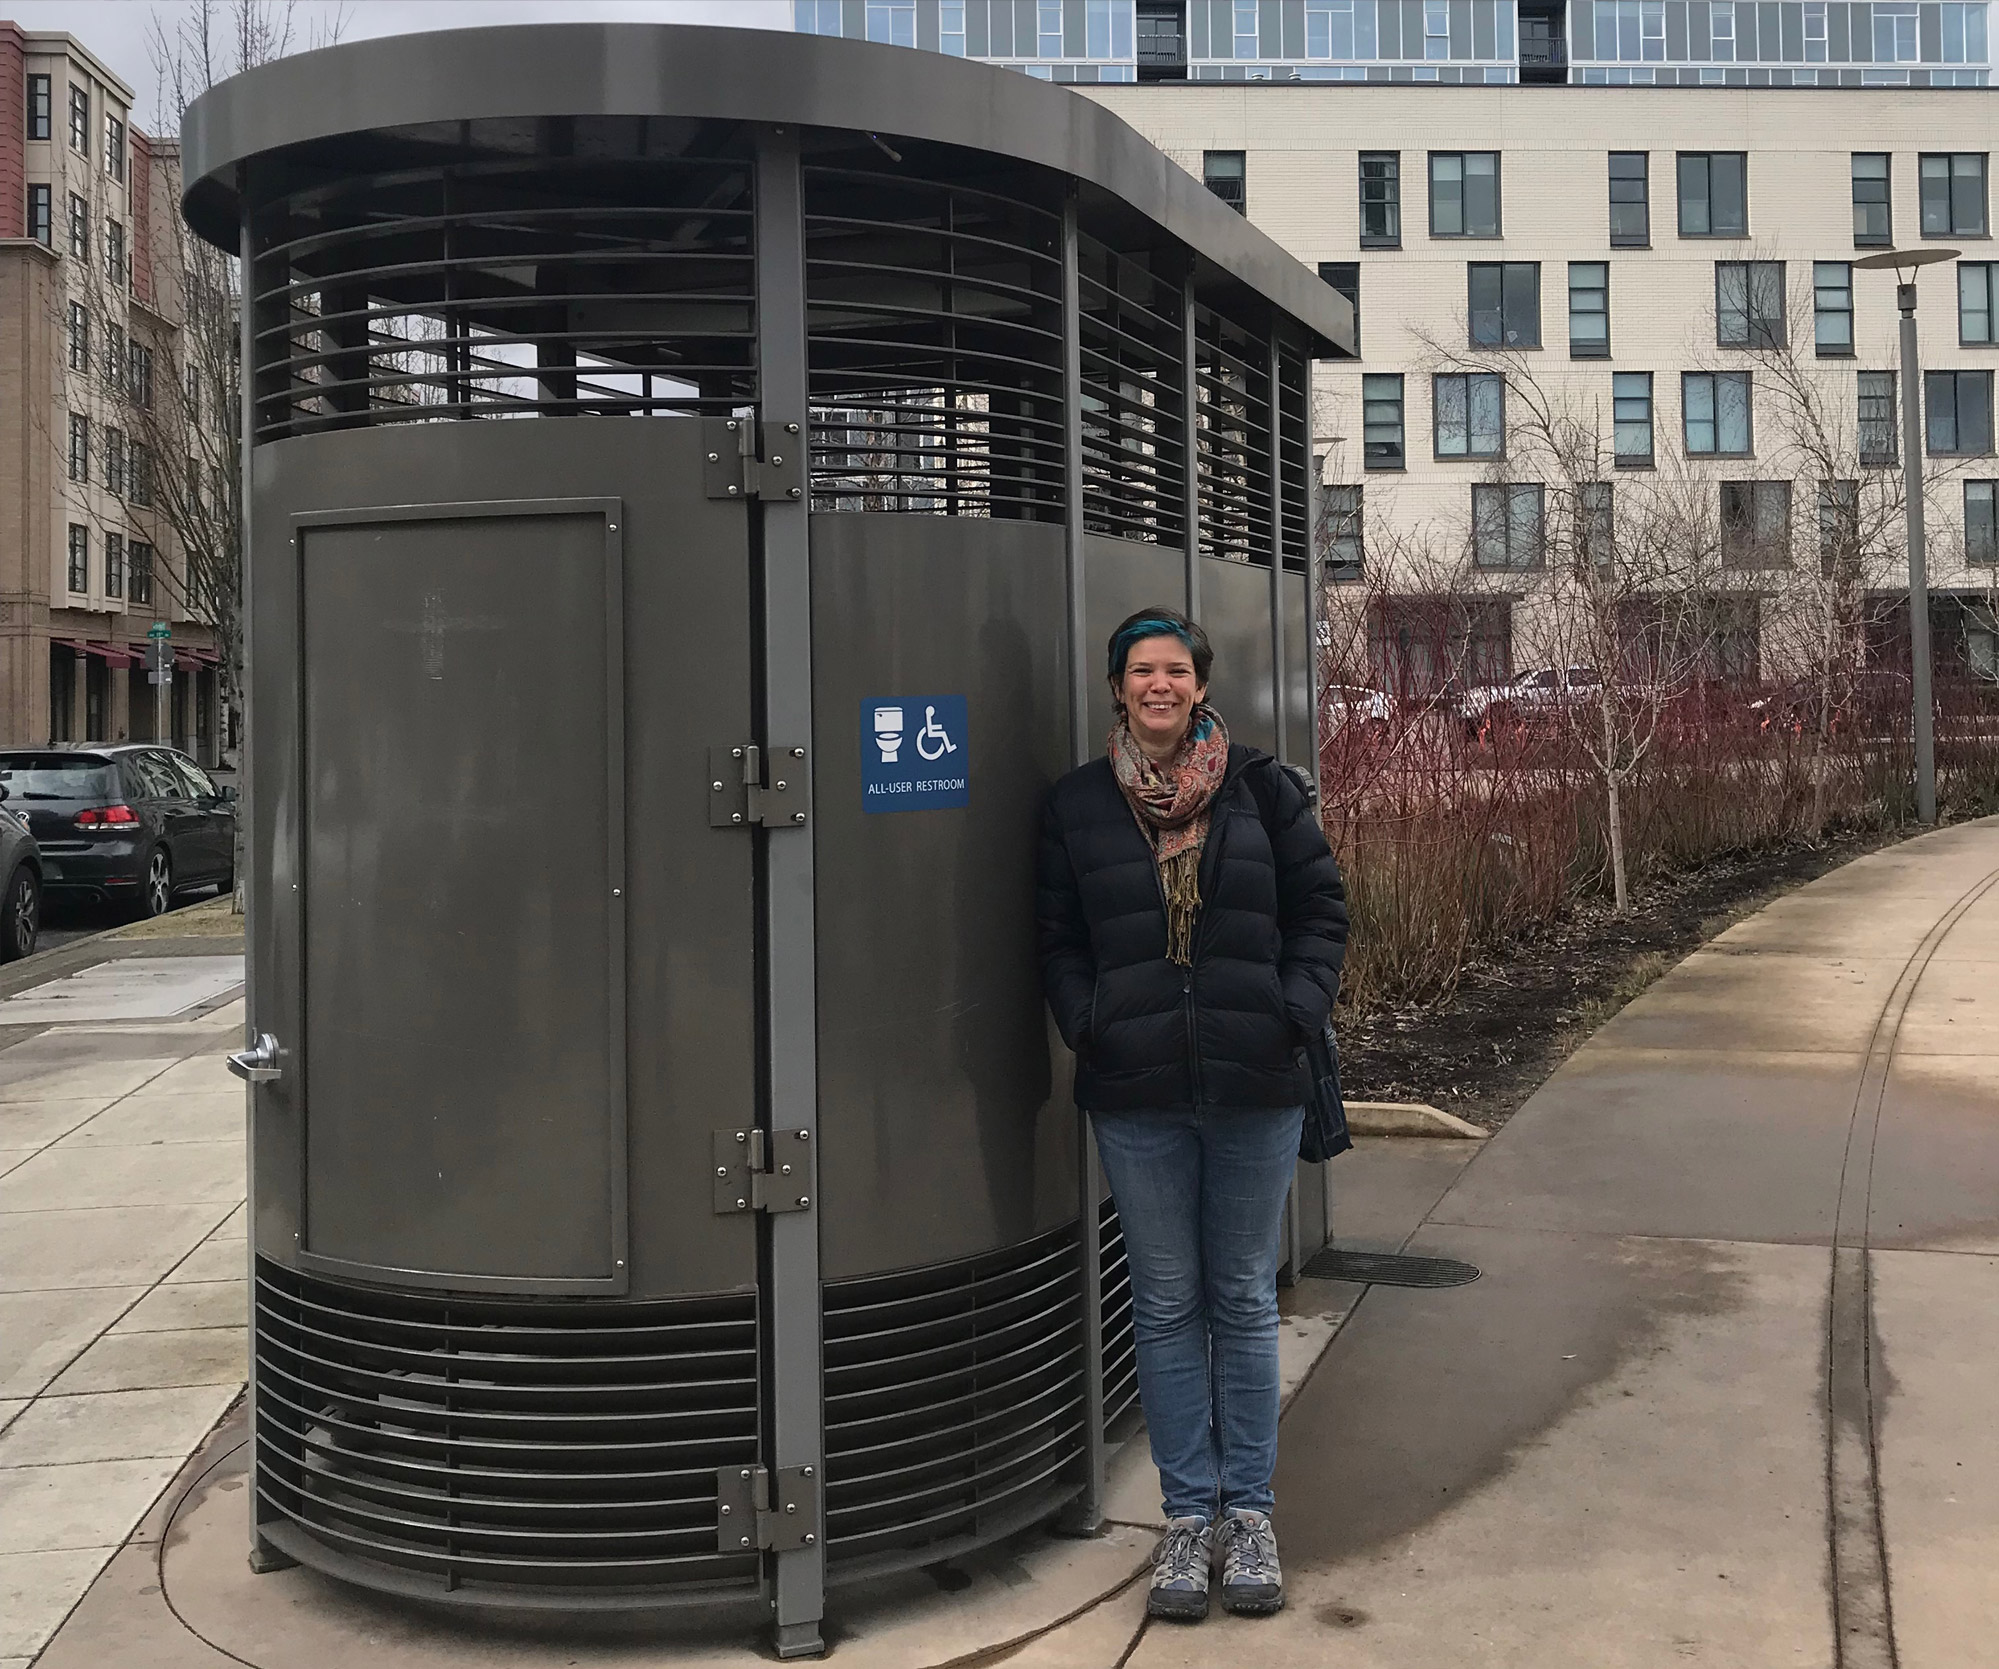 Churchill Fellow explores accessibility to public toilets and inclusion featured image